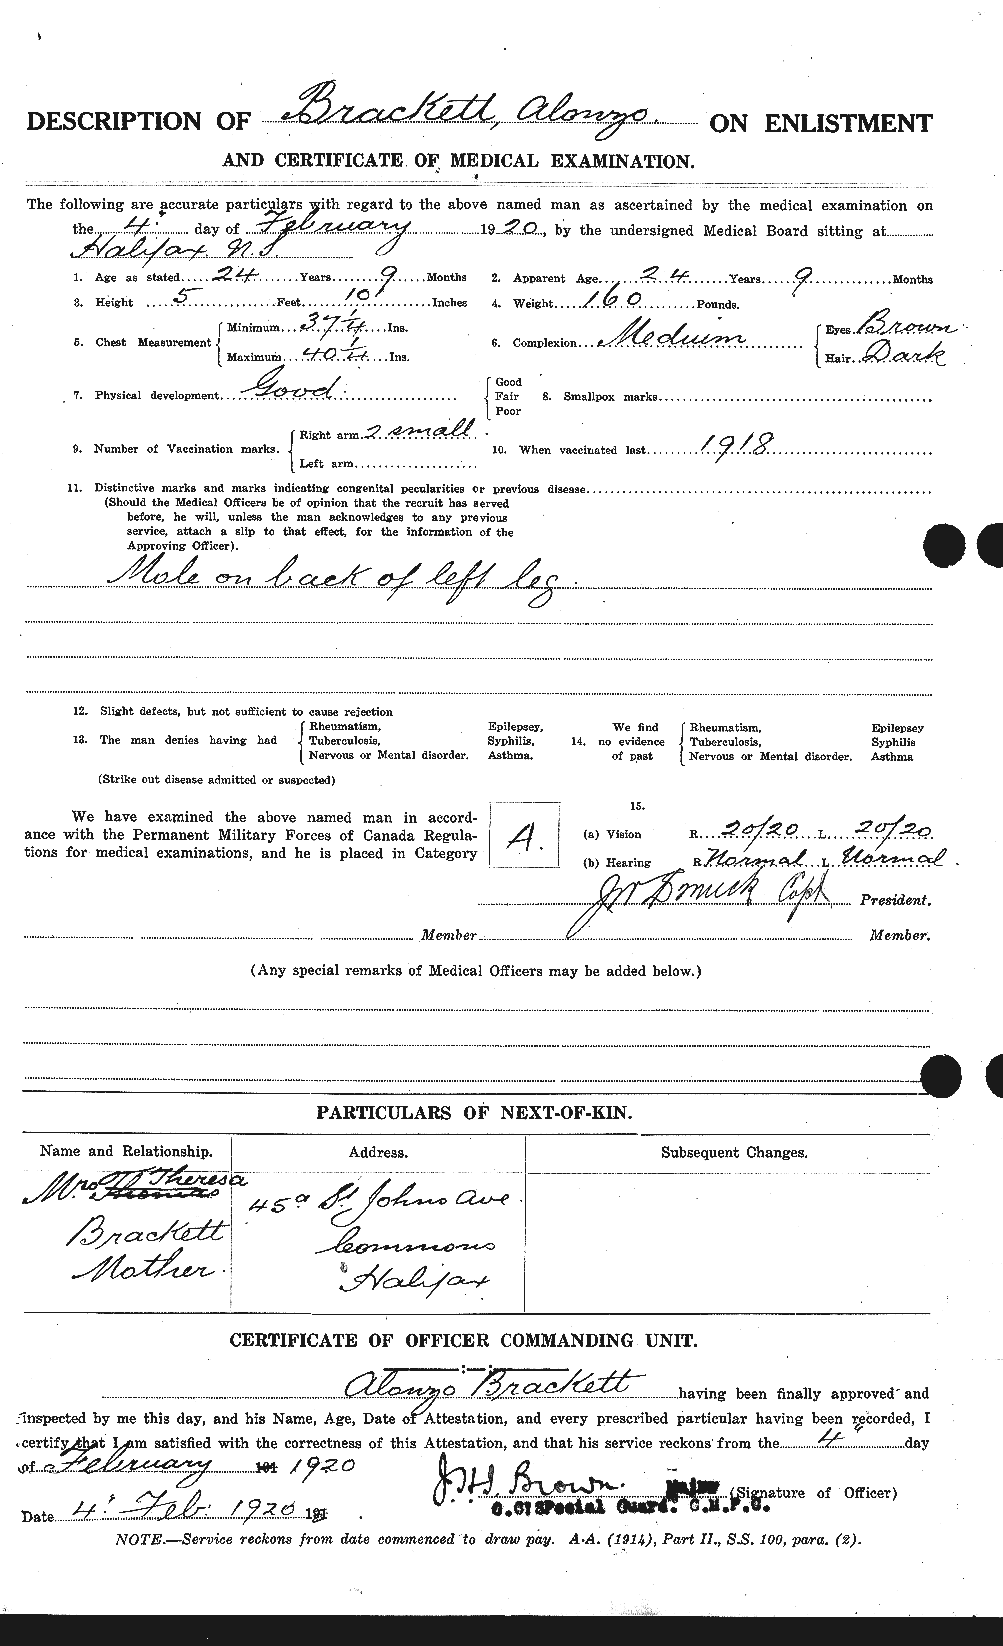 Personnel Records of the First World War - CEF 254727b